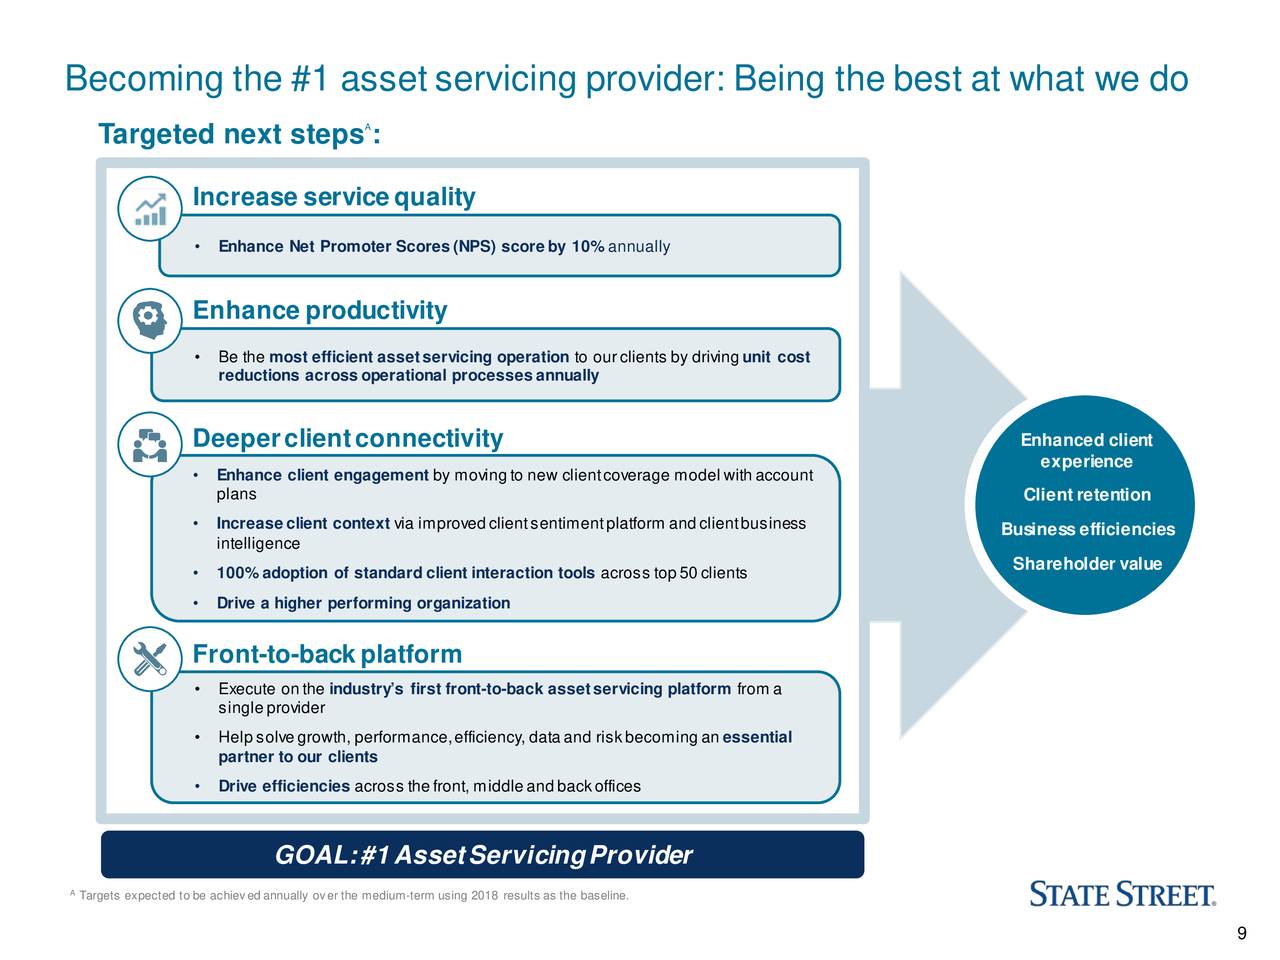 Becoming the #1 asset servicing provider: Being the best at what we do